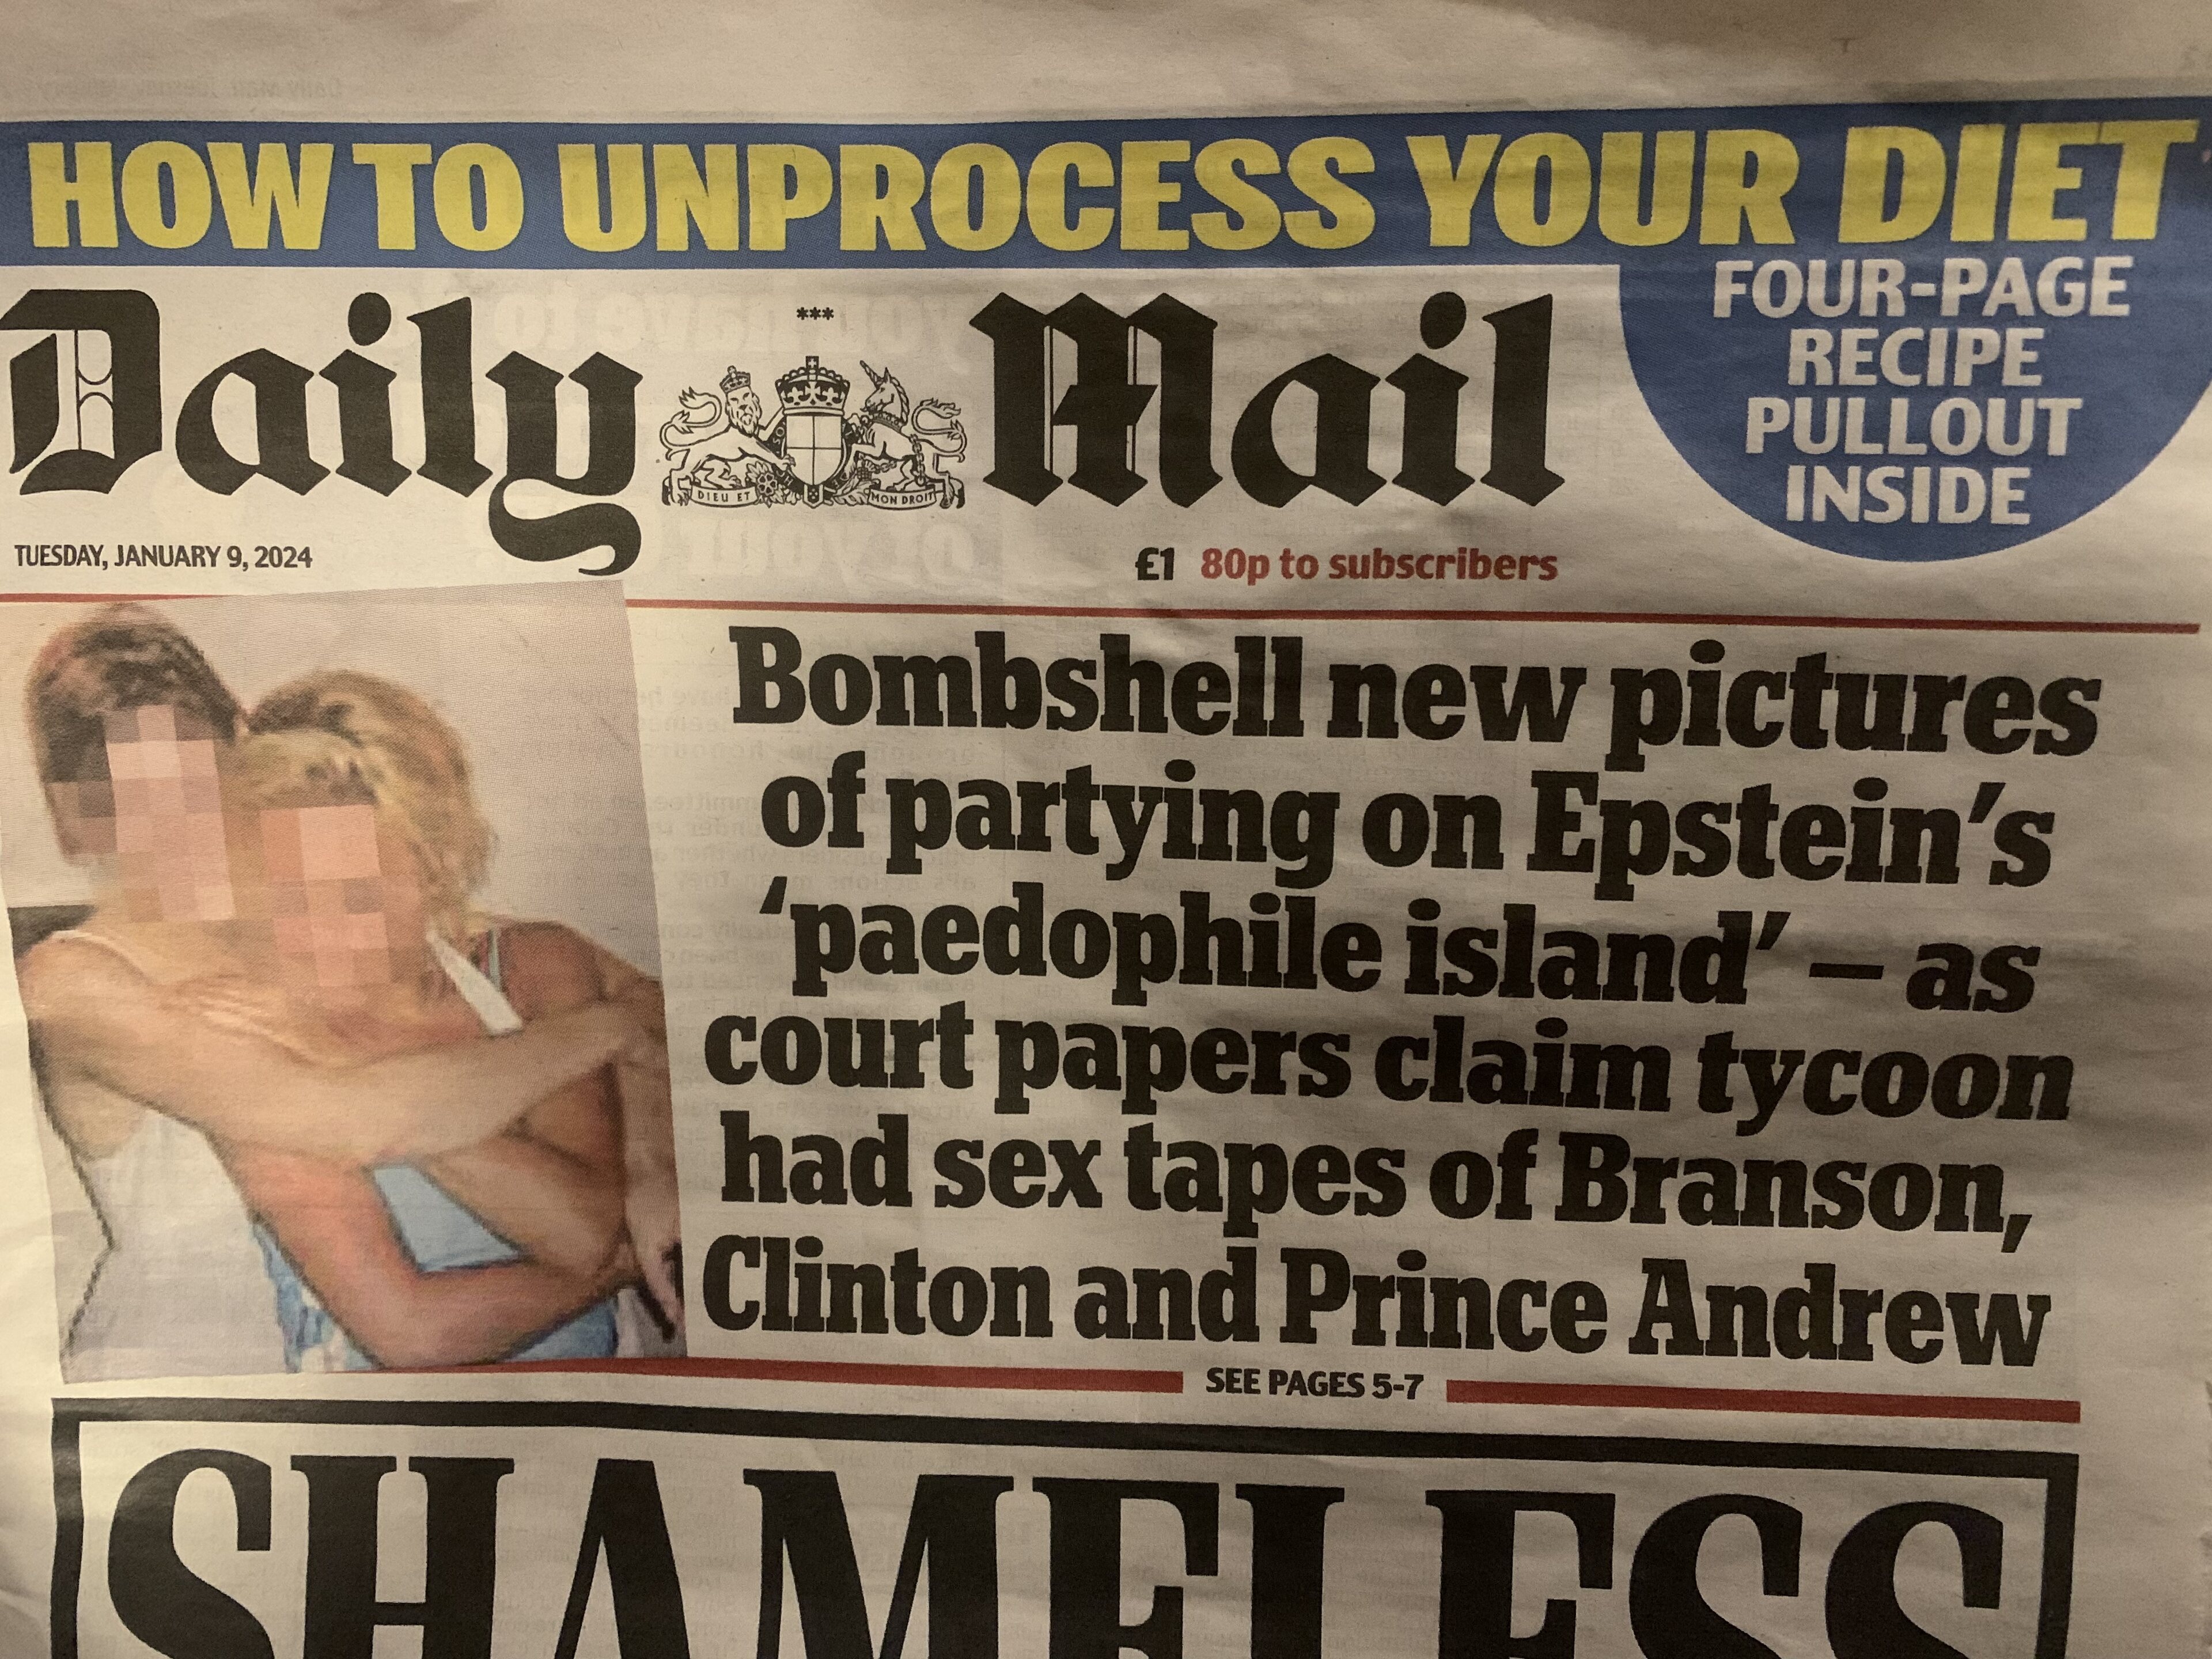 Ghislaine Maxwell trial - Page 54 - News, Politics & Economics - PistonHeads UK - The image shows a page from a newspaper, focusing on the headline. The headline is bold and prominently displayed at the top of the page, with the words "New pictures of Epstein's 'party girl'" indicating that the article discusses new photographs related to Jeffrey Epstein's social life or alleged activities involving underage girls. Below the headline, there's a smaller text providing context on the story, which mentions Epstein's "death island" and his ties to former President Bill Clinton.

The newspaper page is partially visible, showing other stories such as one about unprocessed food in the NHS (National Health Service) and another headline that reads "Bomb shell found at school." These suggest a mix of international and domestic news.

There's a photo of two people embracing on the front page, which appears to be related to the Epstein story, possibly depicting the couple mentioned in one of the articles. The presence of this image indicates that the newspaper is reporting on the aftermath or context of the Epstein story.

The overall layout of the page suggests a professional design with clear headlines and sections for different news stories. The colors used for the text are traditional newspaper colors, which are designed to be eye-catching against the background paper.